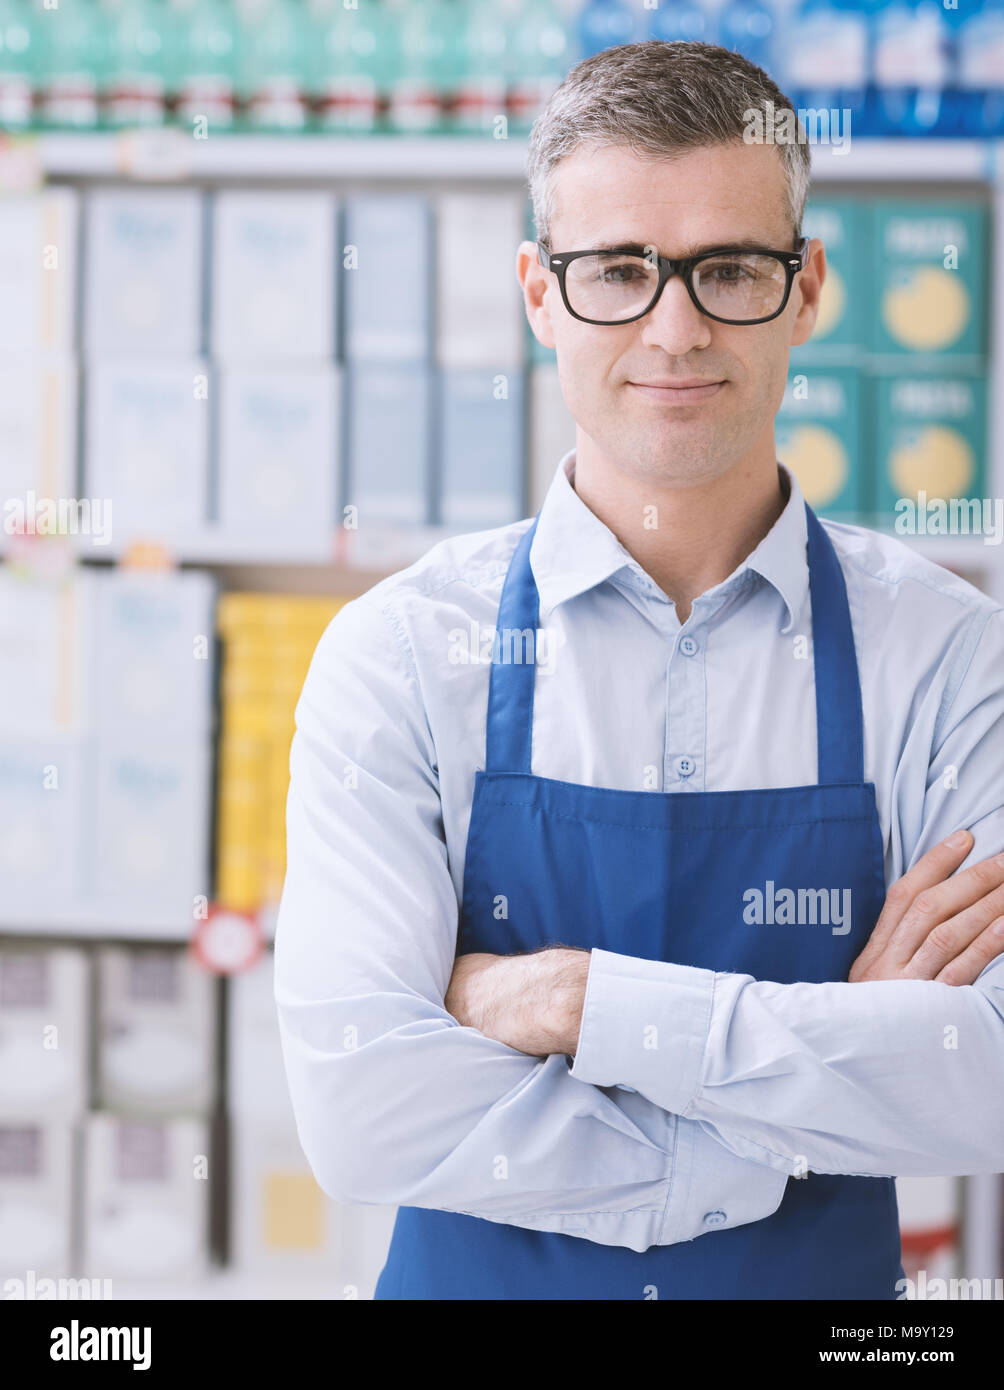 Confident smiling supermarket clerk posing at the shopping mall, retail job concept Stock Photo